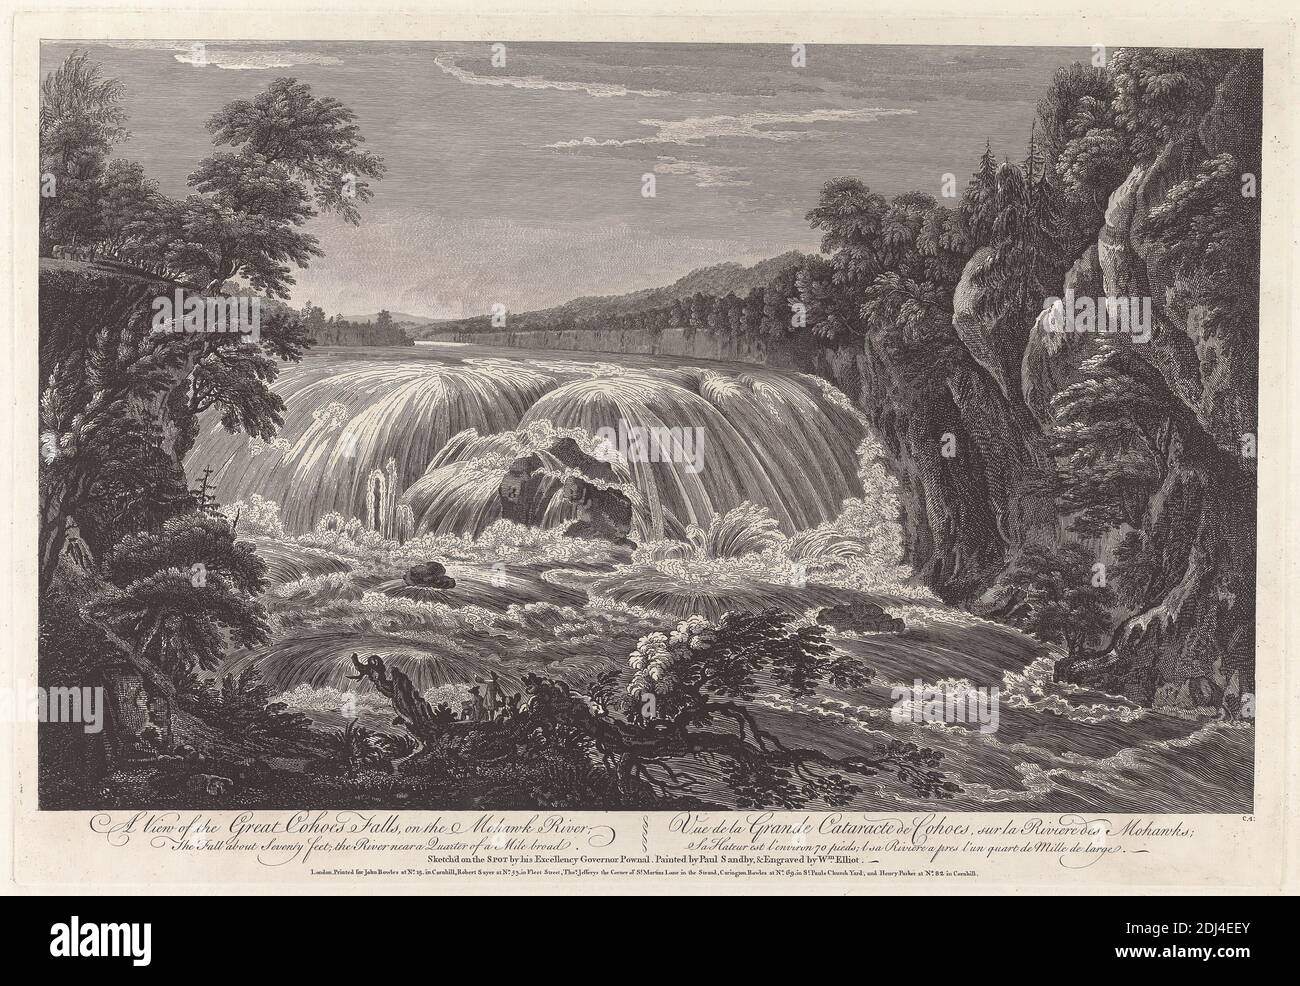 A View of the Great Cohoes Falls, on the Mohawk River, Print made by William Elliot, active 1774, died 1792, British, after Paul Sandby RA, 1731–1809, British, after drawing by Thomas Pownall, 1722–1805, British, Published by John Bowles, 1701–1779, British, Published by Robert Sayer, 1725–1794, British, Published by Thomas Jefferys, 1719–1771, British, Published by Carington Bowles, 1724–1793, British, 1768, Etching and line engraving on medium, slightly textured, cream laid paper, Sheet: 17 7/8 × 23 5/8 inches (45.4 × 60 cm), Plate: 14 1/4 × 20 5/8 inches (36.2 × 52.4 cm), and Image: 12 1/2 Stock Photo